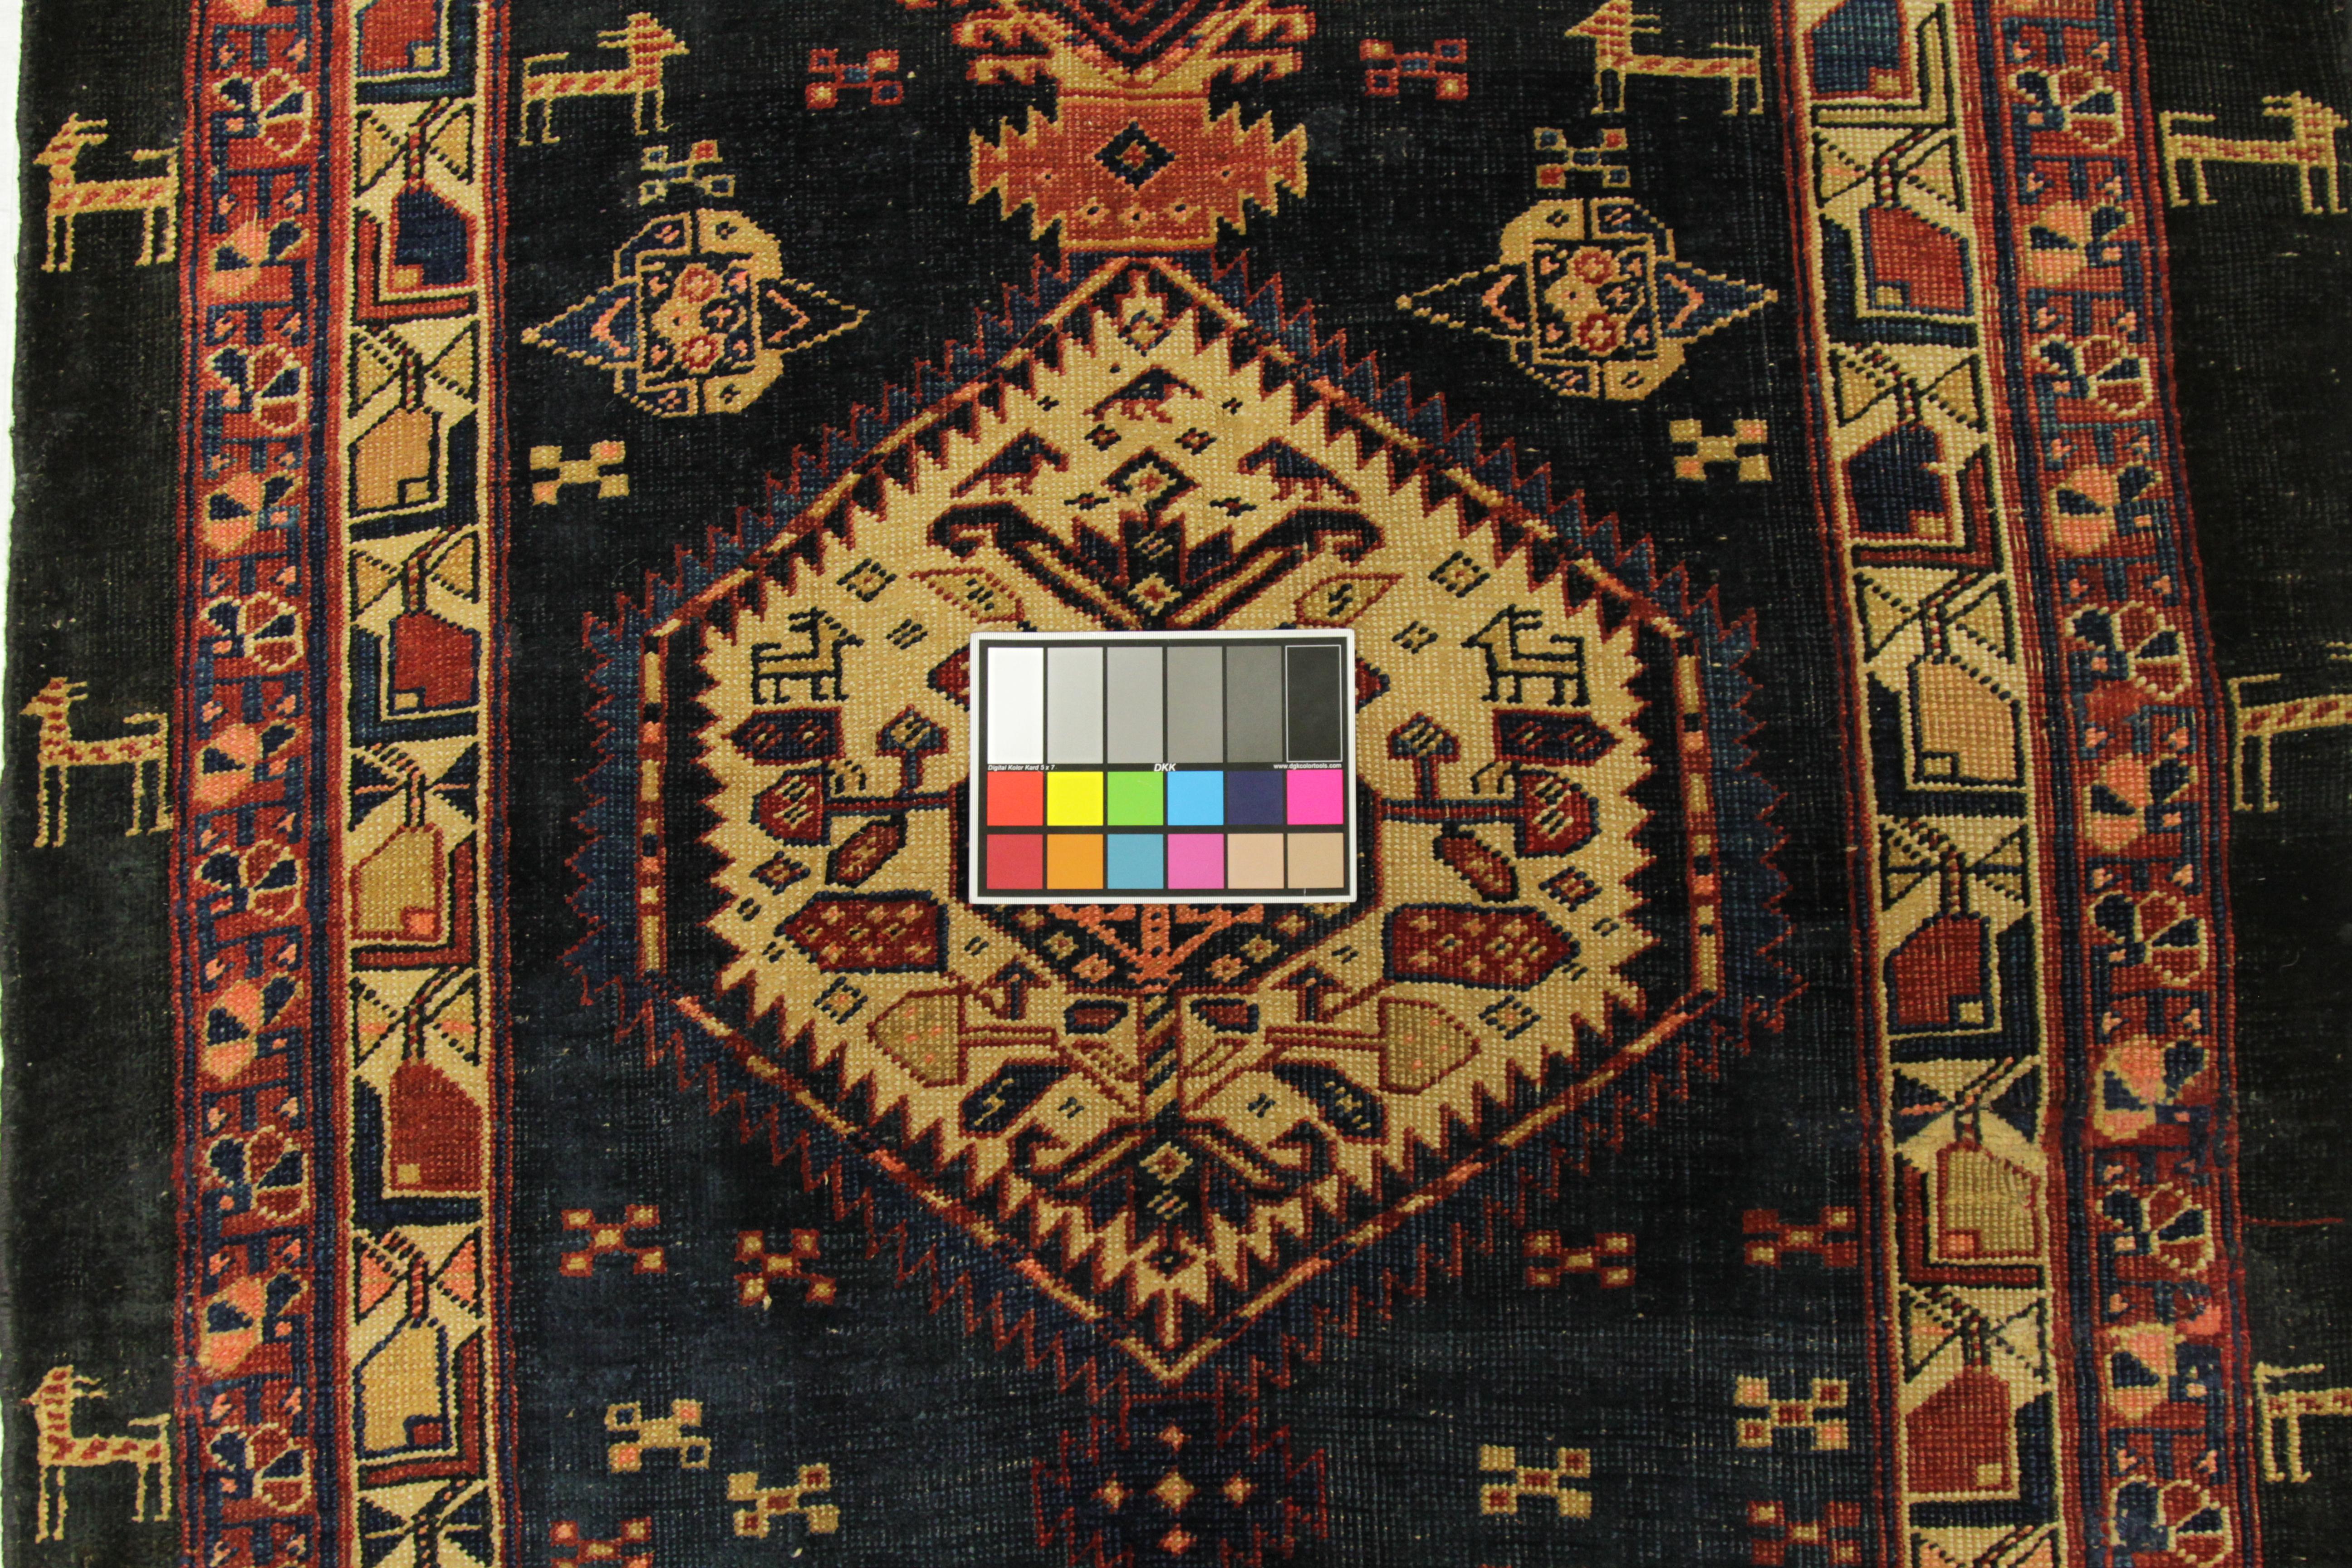 Antique Persian Rug Azerbaijan Design with Magnificent Jewel Patterns circa 1900 For Sale 3